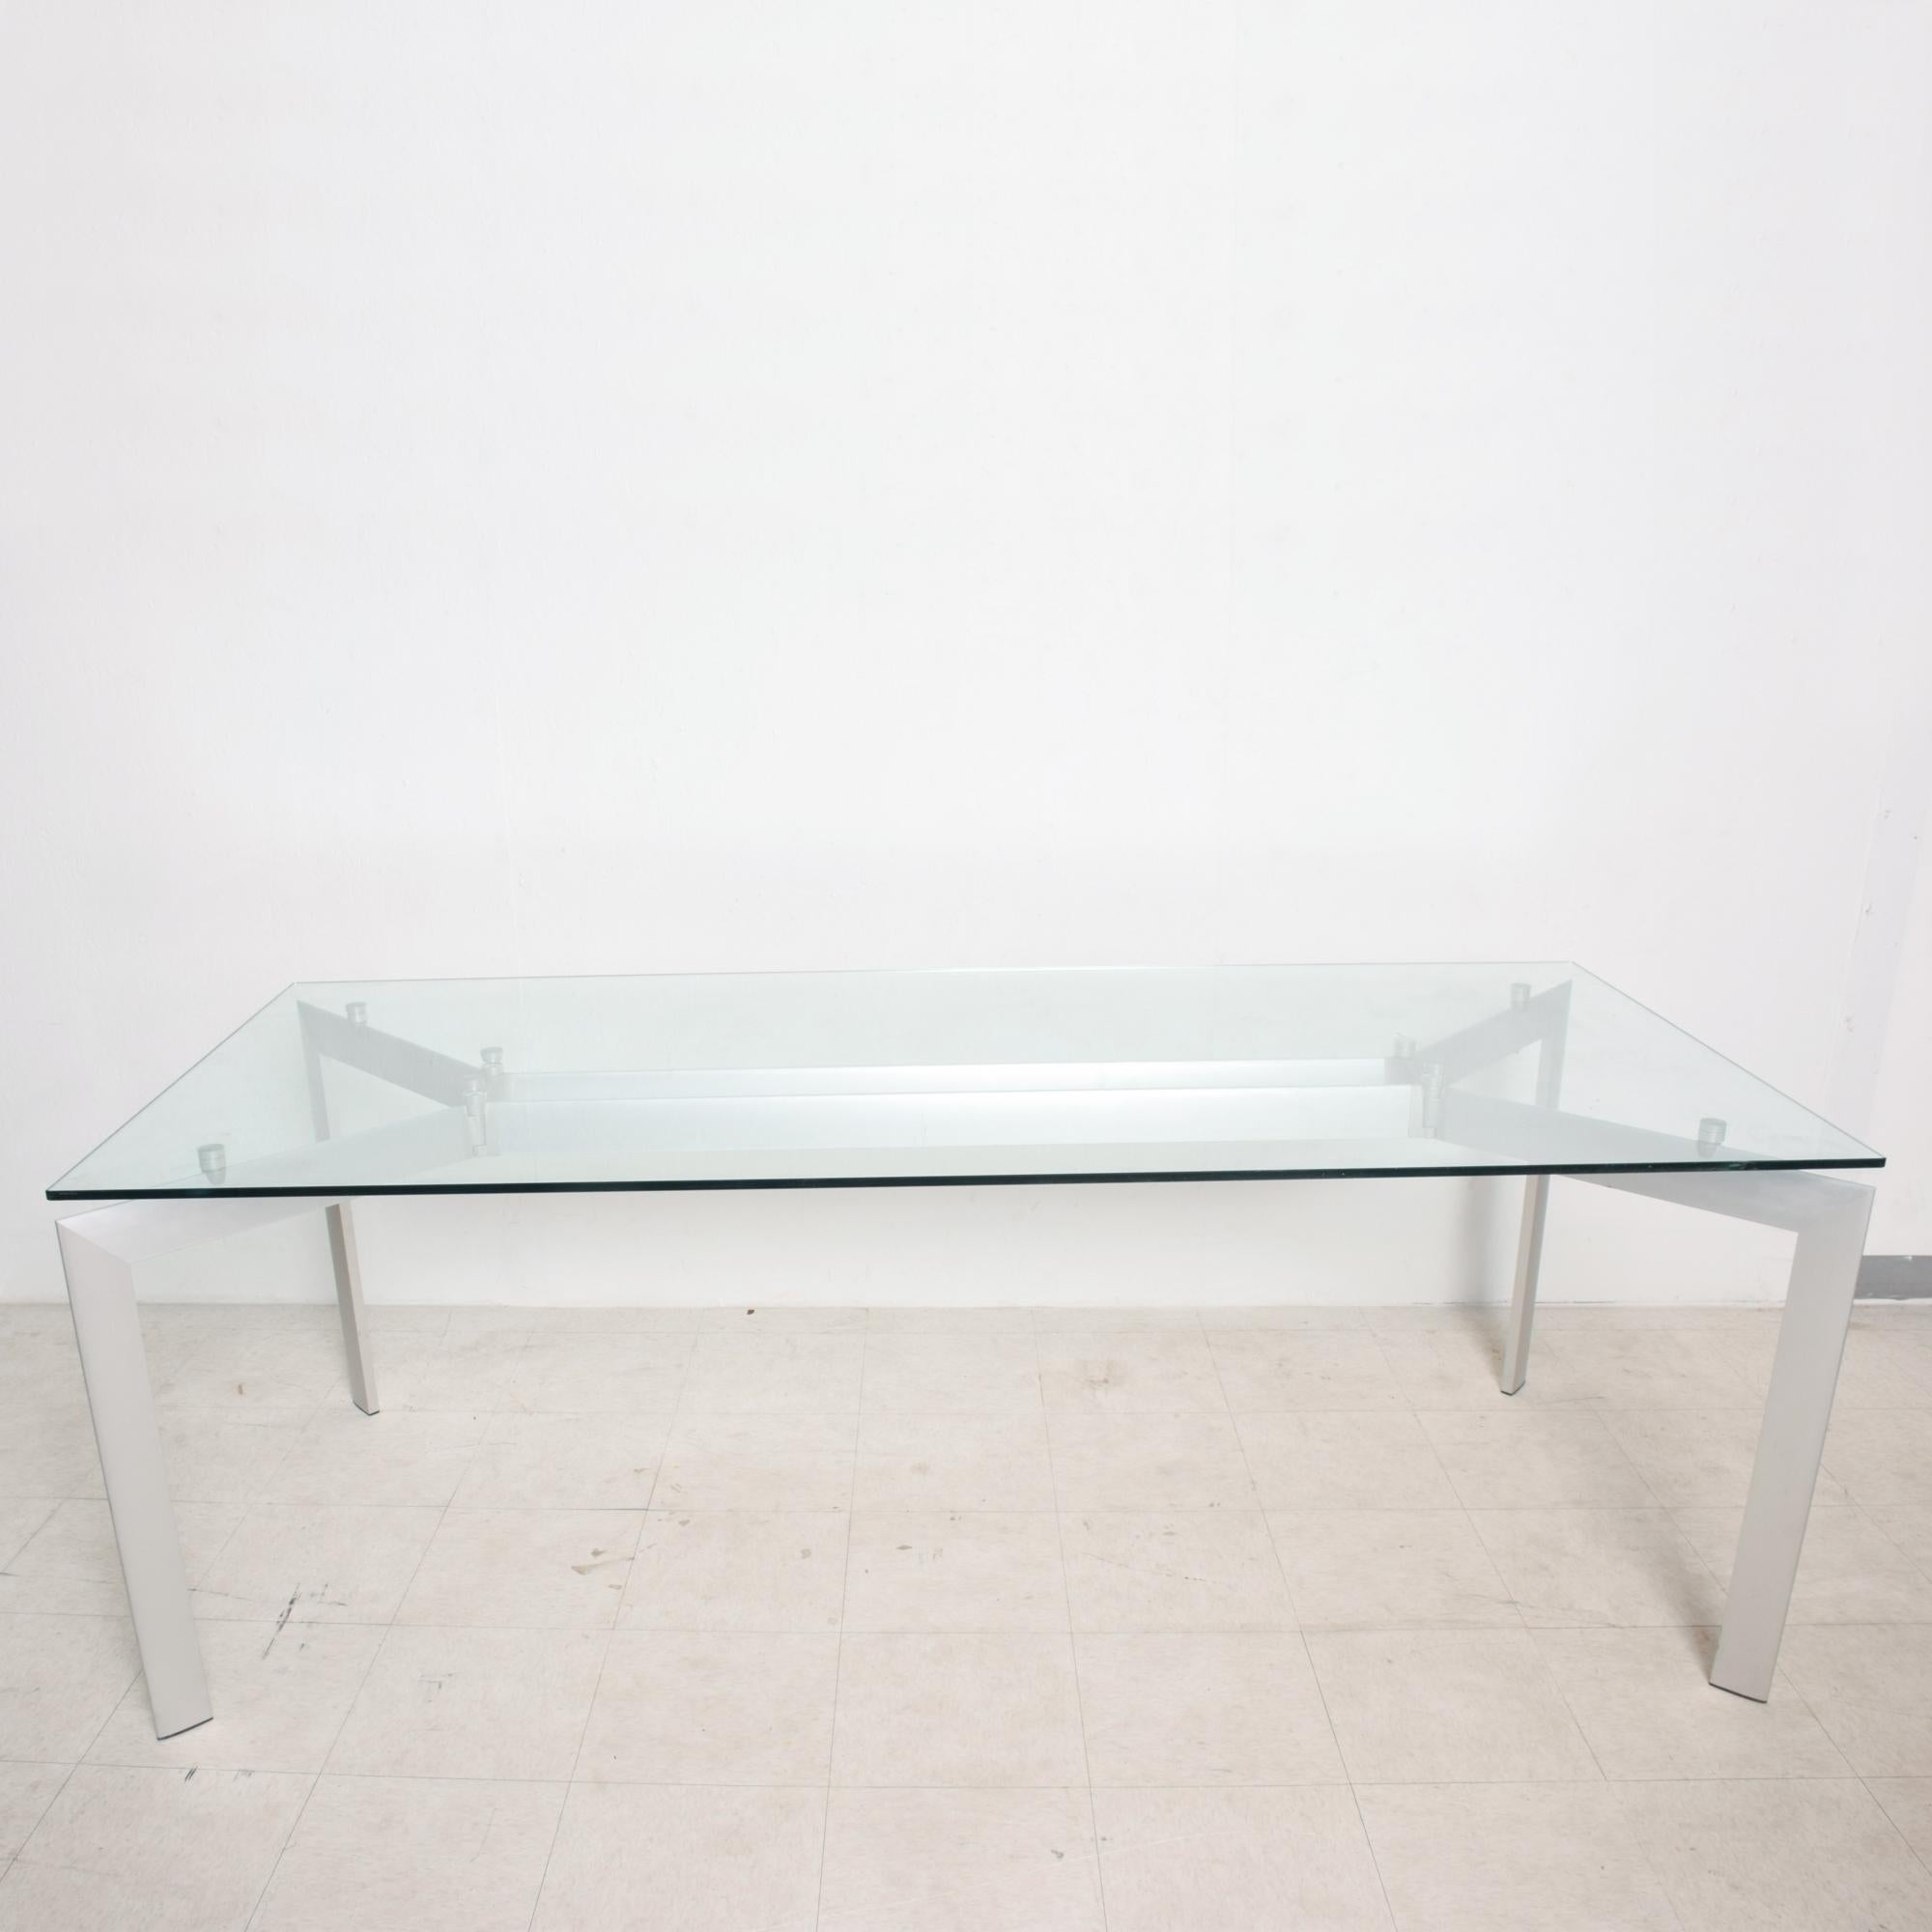 Italian 1990s Floating Glass Metal Metra Dining Table Makio Hasuike for Seccose Italy